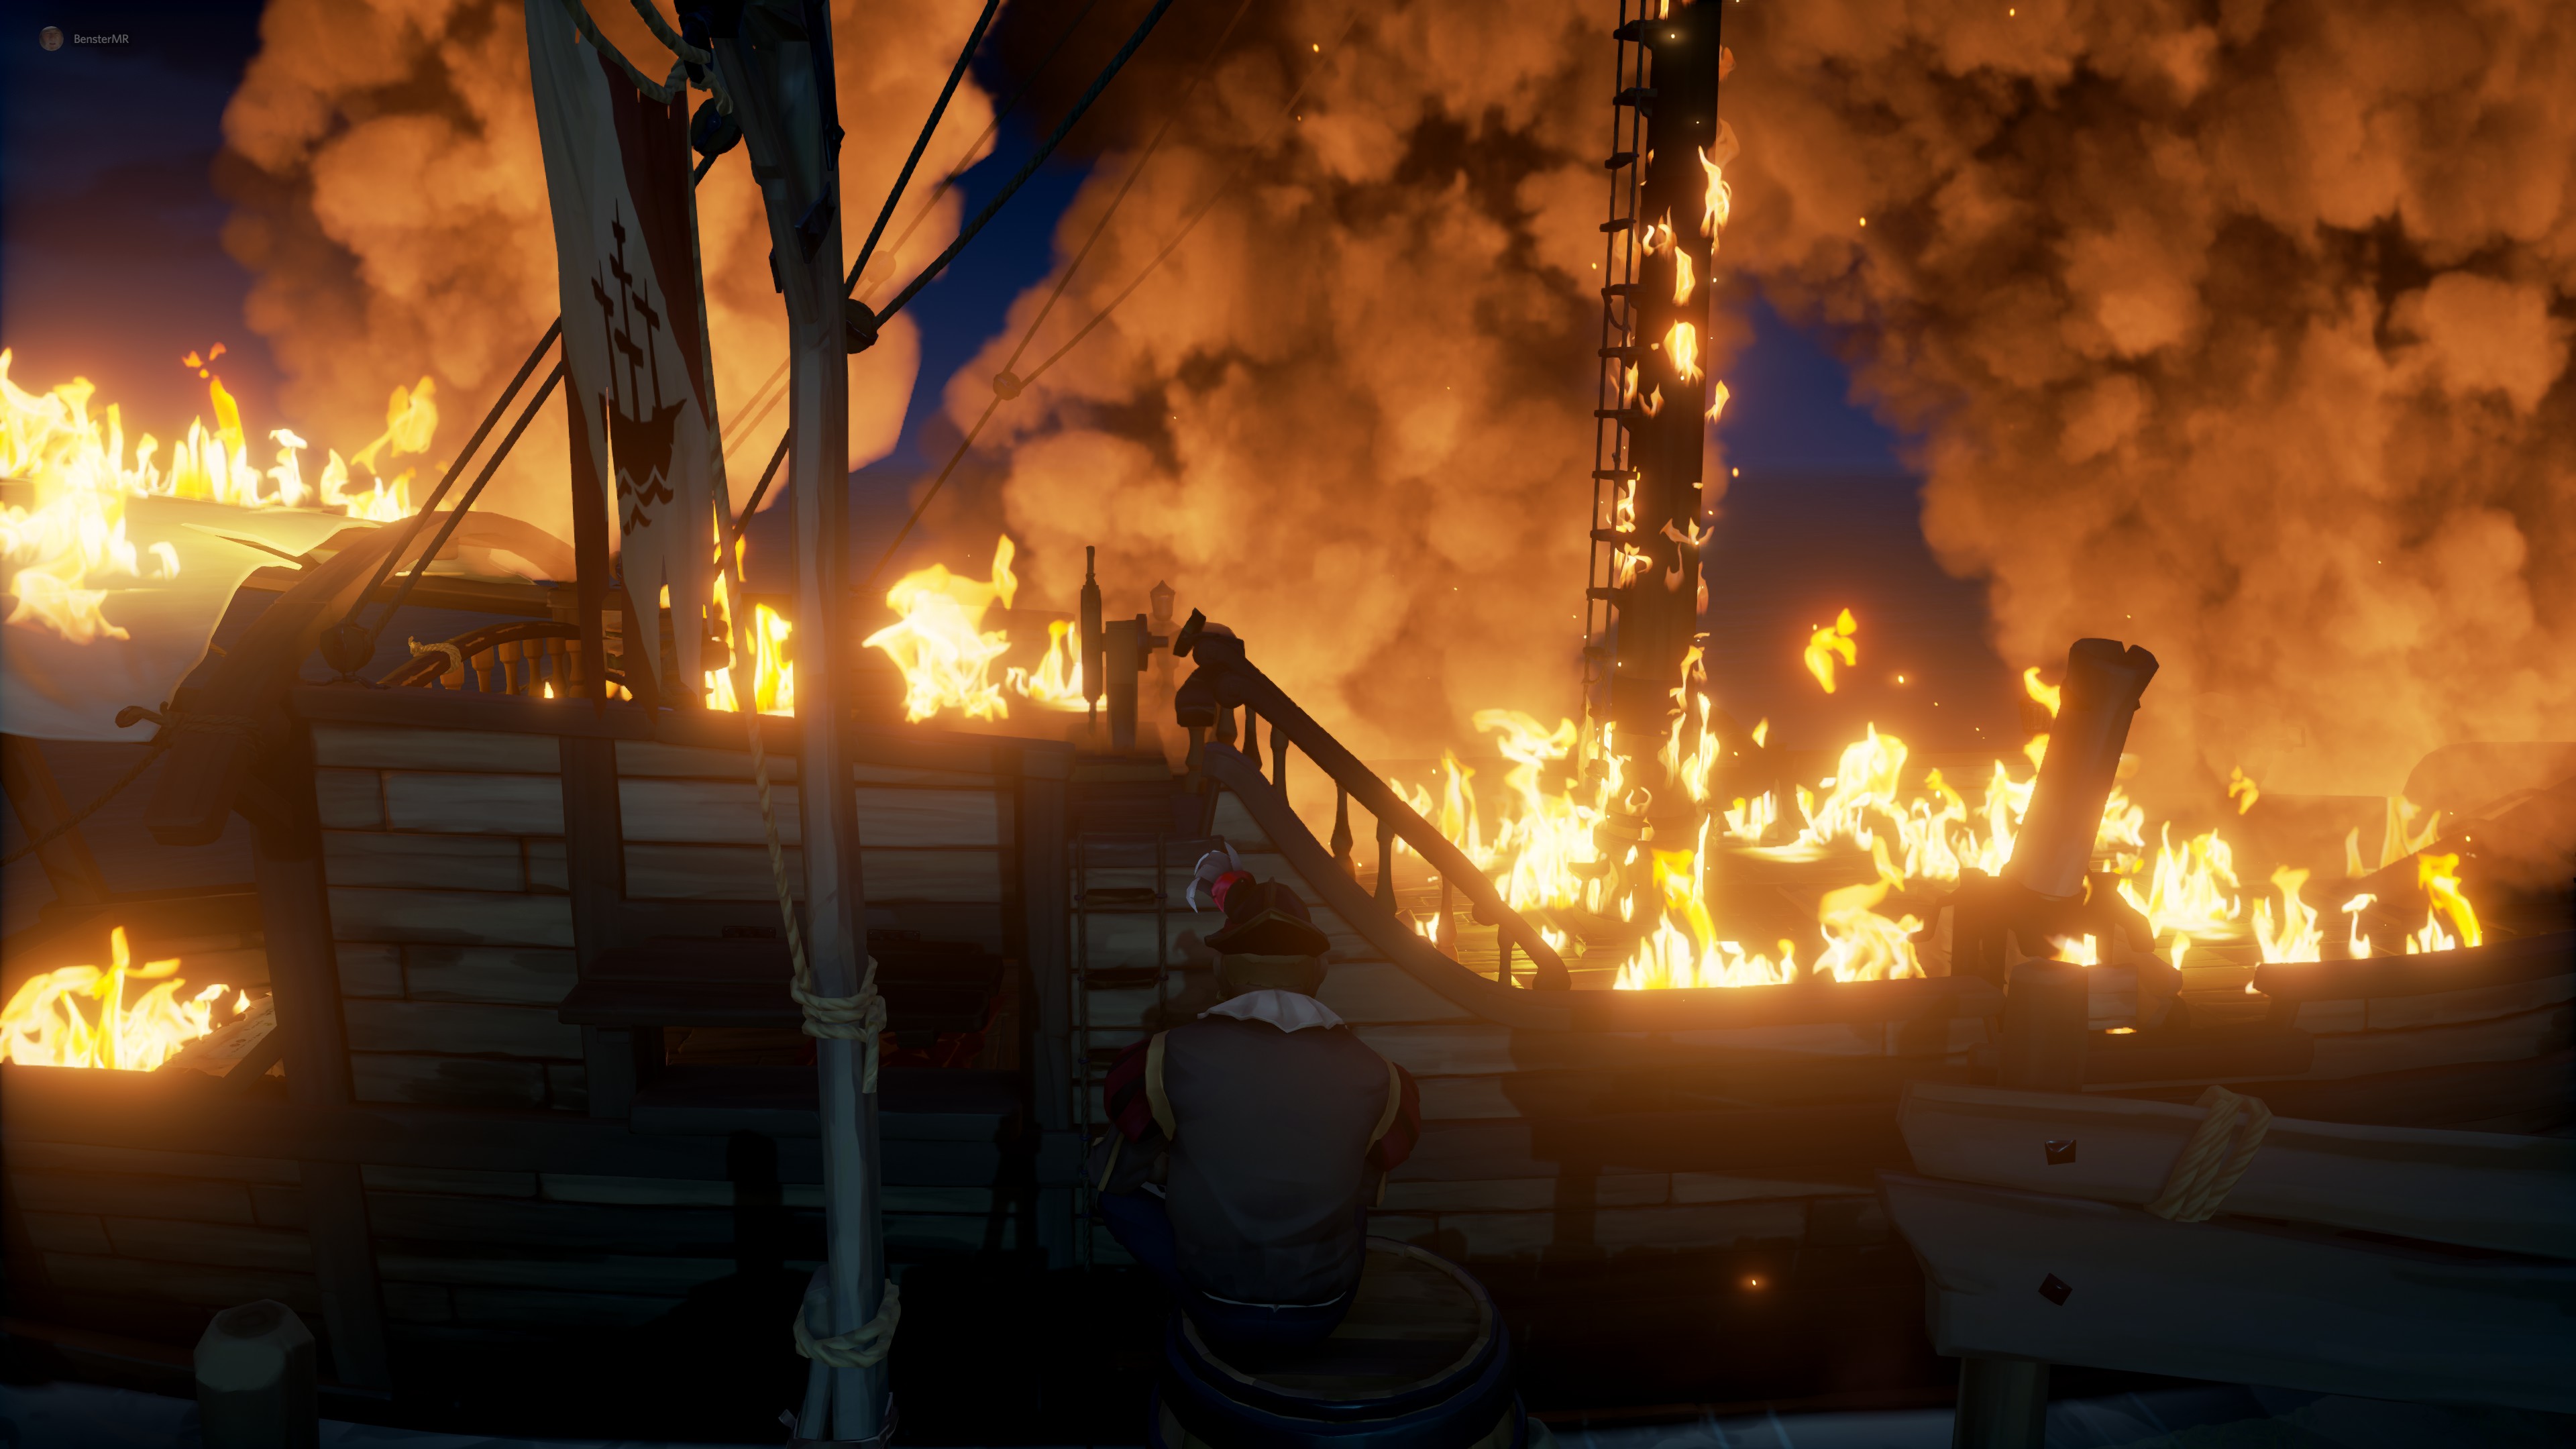 Sea of Thieves - How to Easy Extinguish the Fires on Ship/Boat - Step 1: Keep calm - E26D296